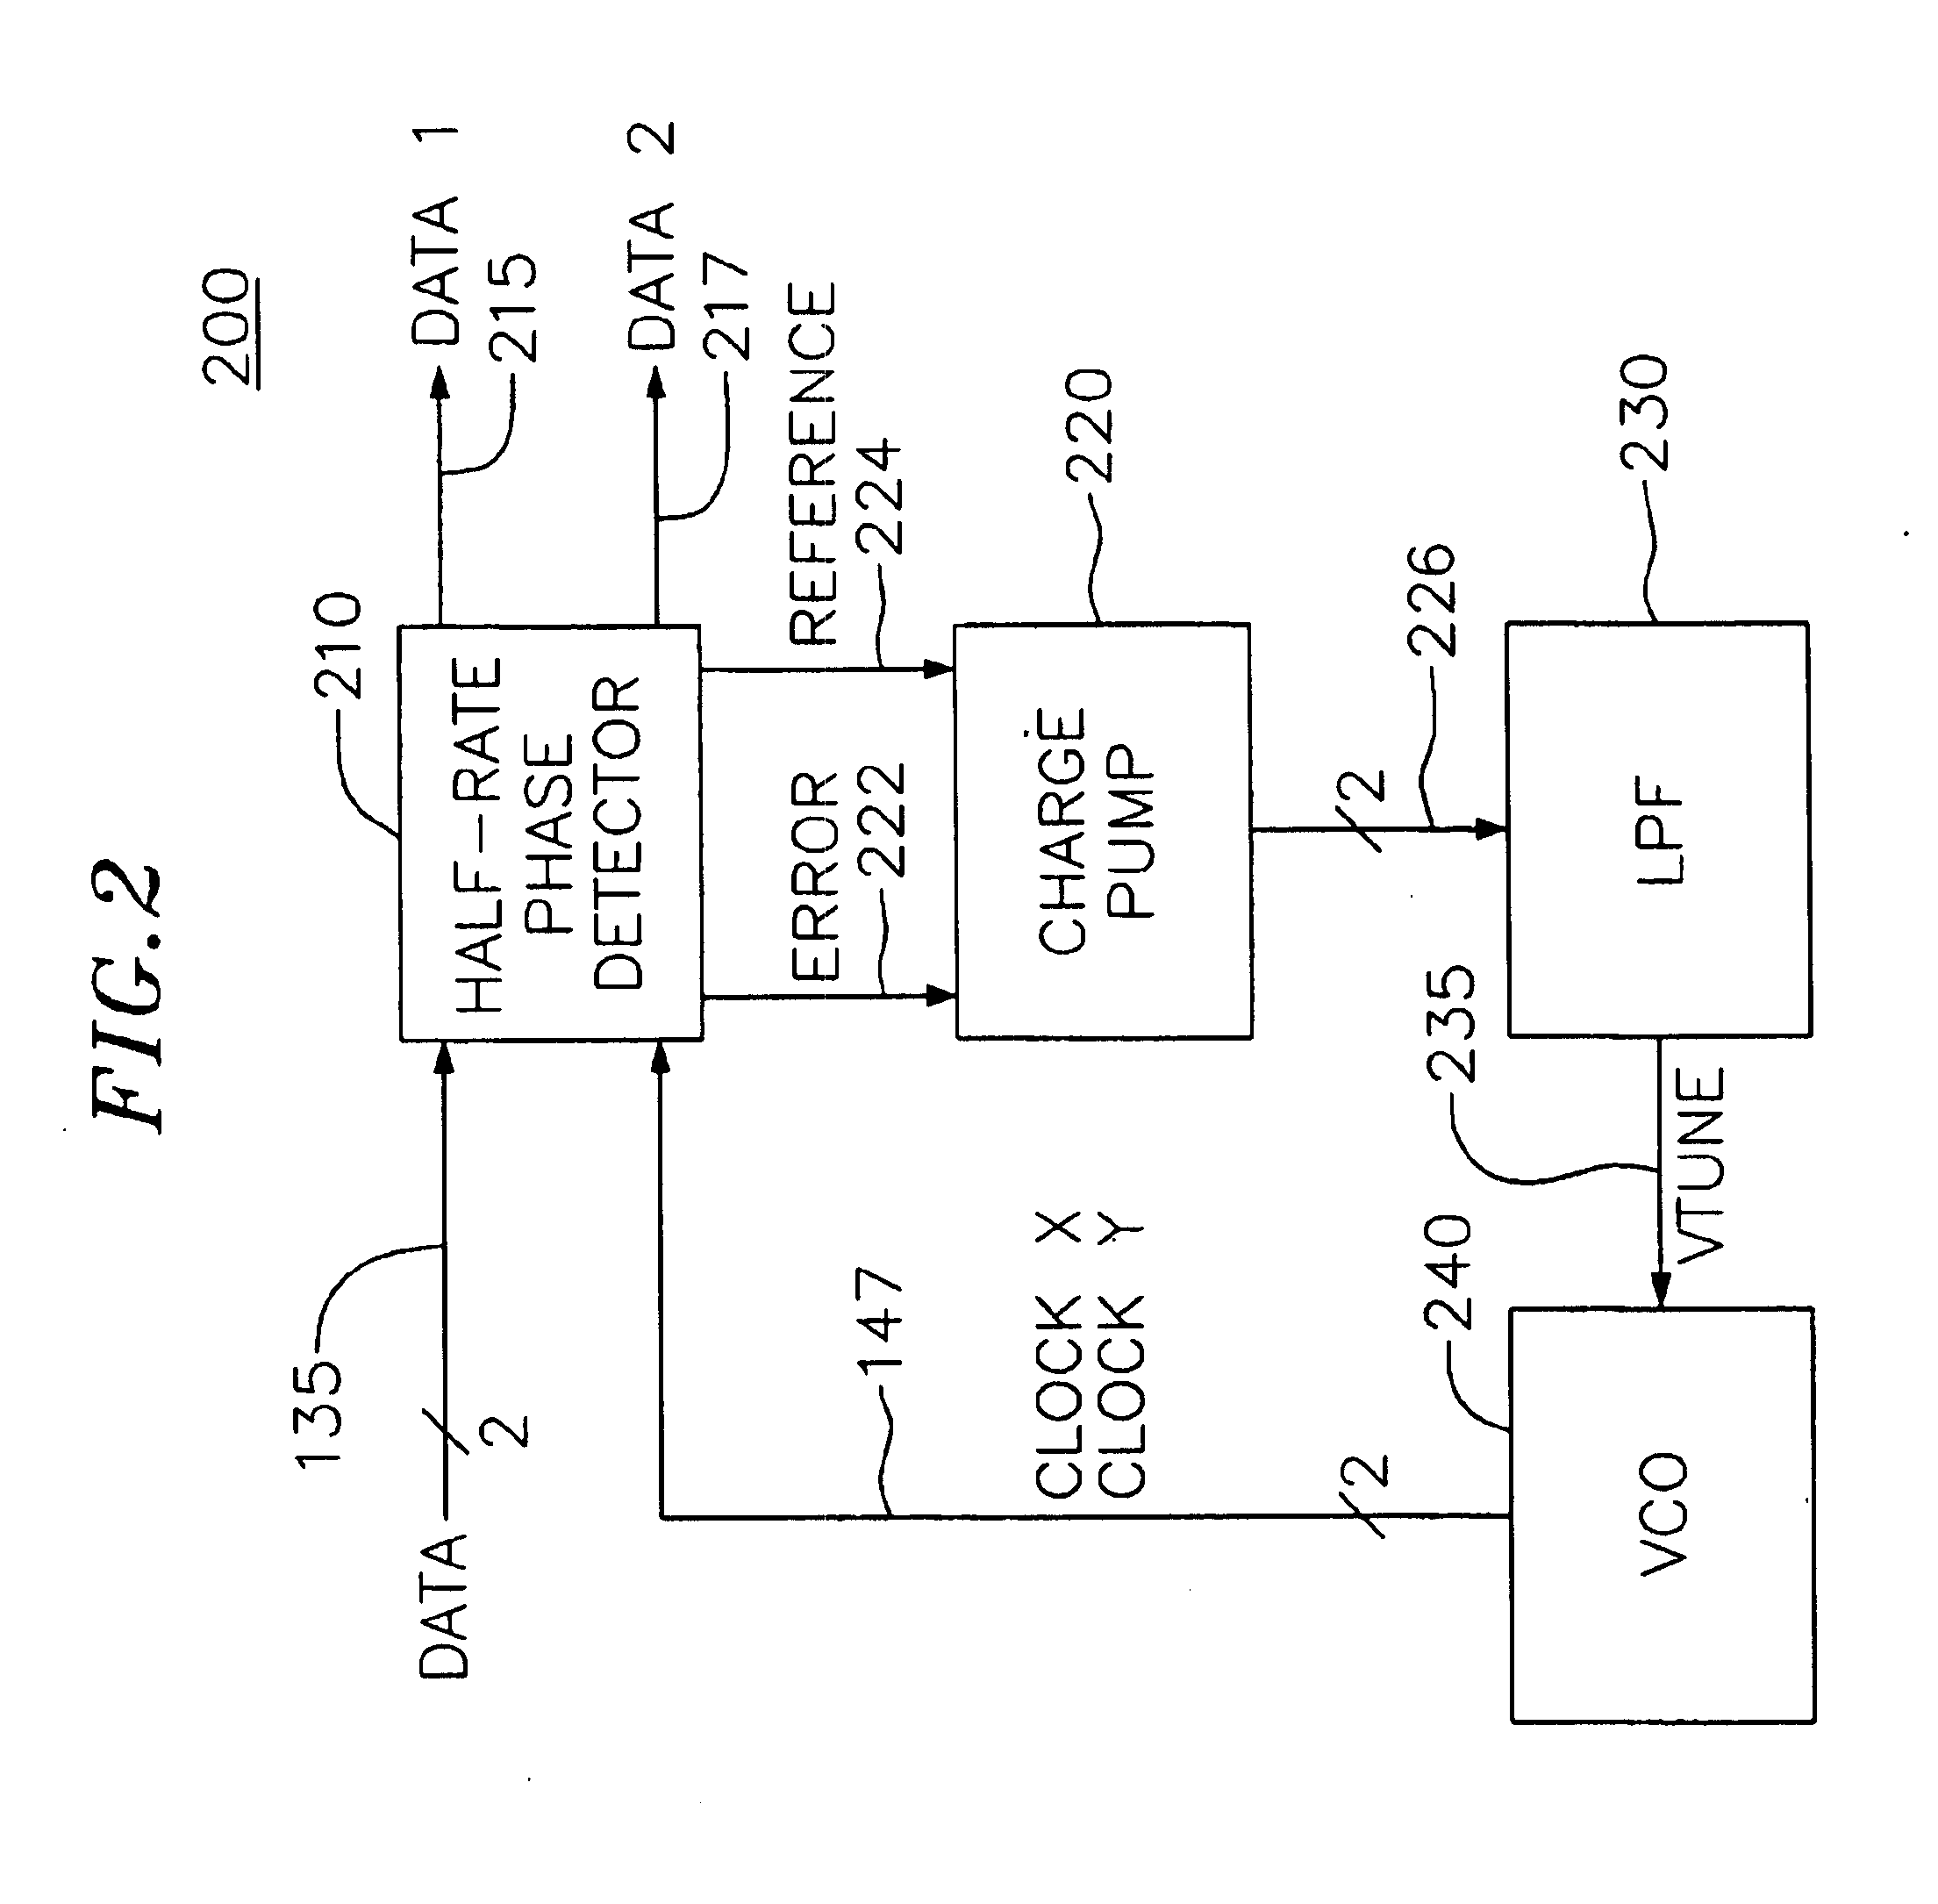 Linear half-rate phase detector and clock and data recovery circuit